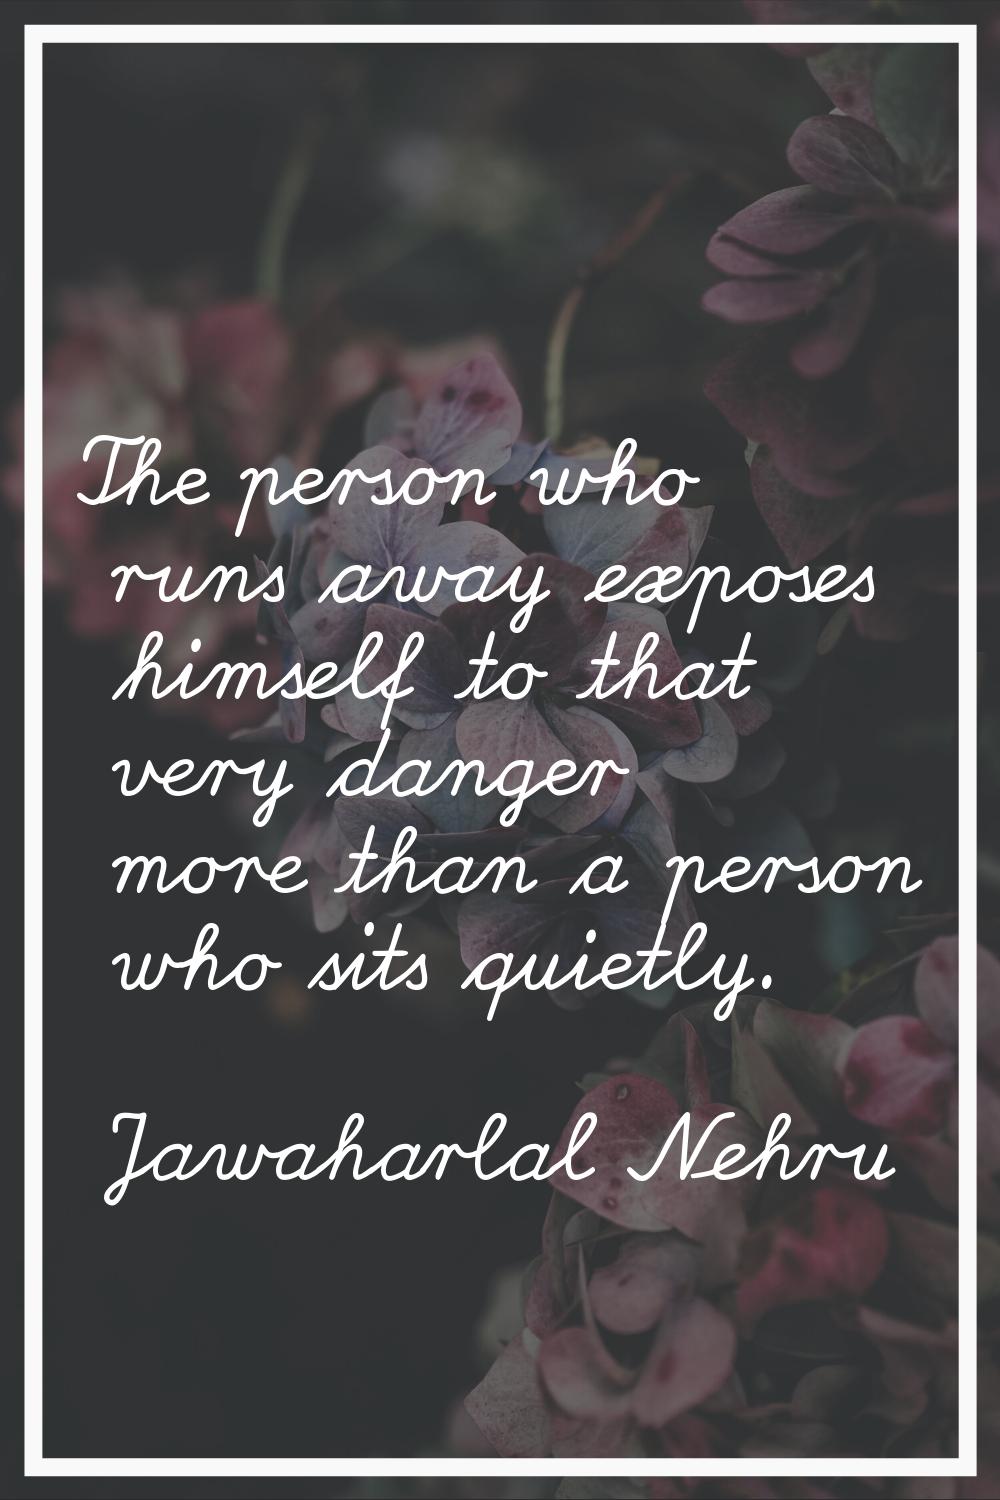 The person who runs away exposes himself to that very danger more than a person who sits quietly.